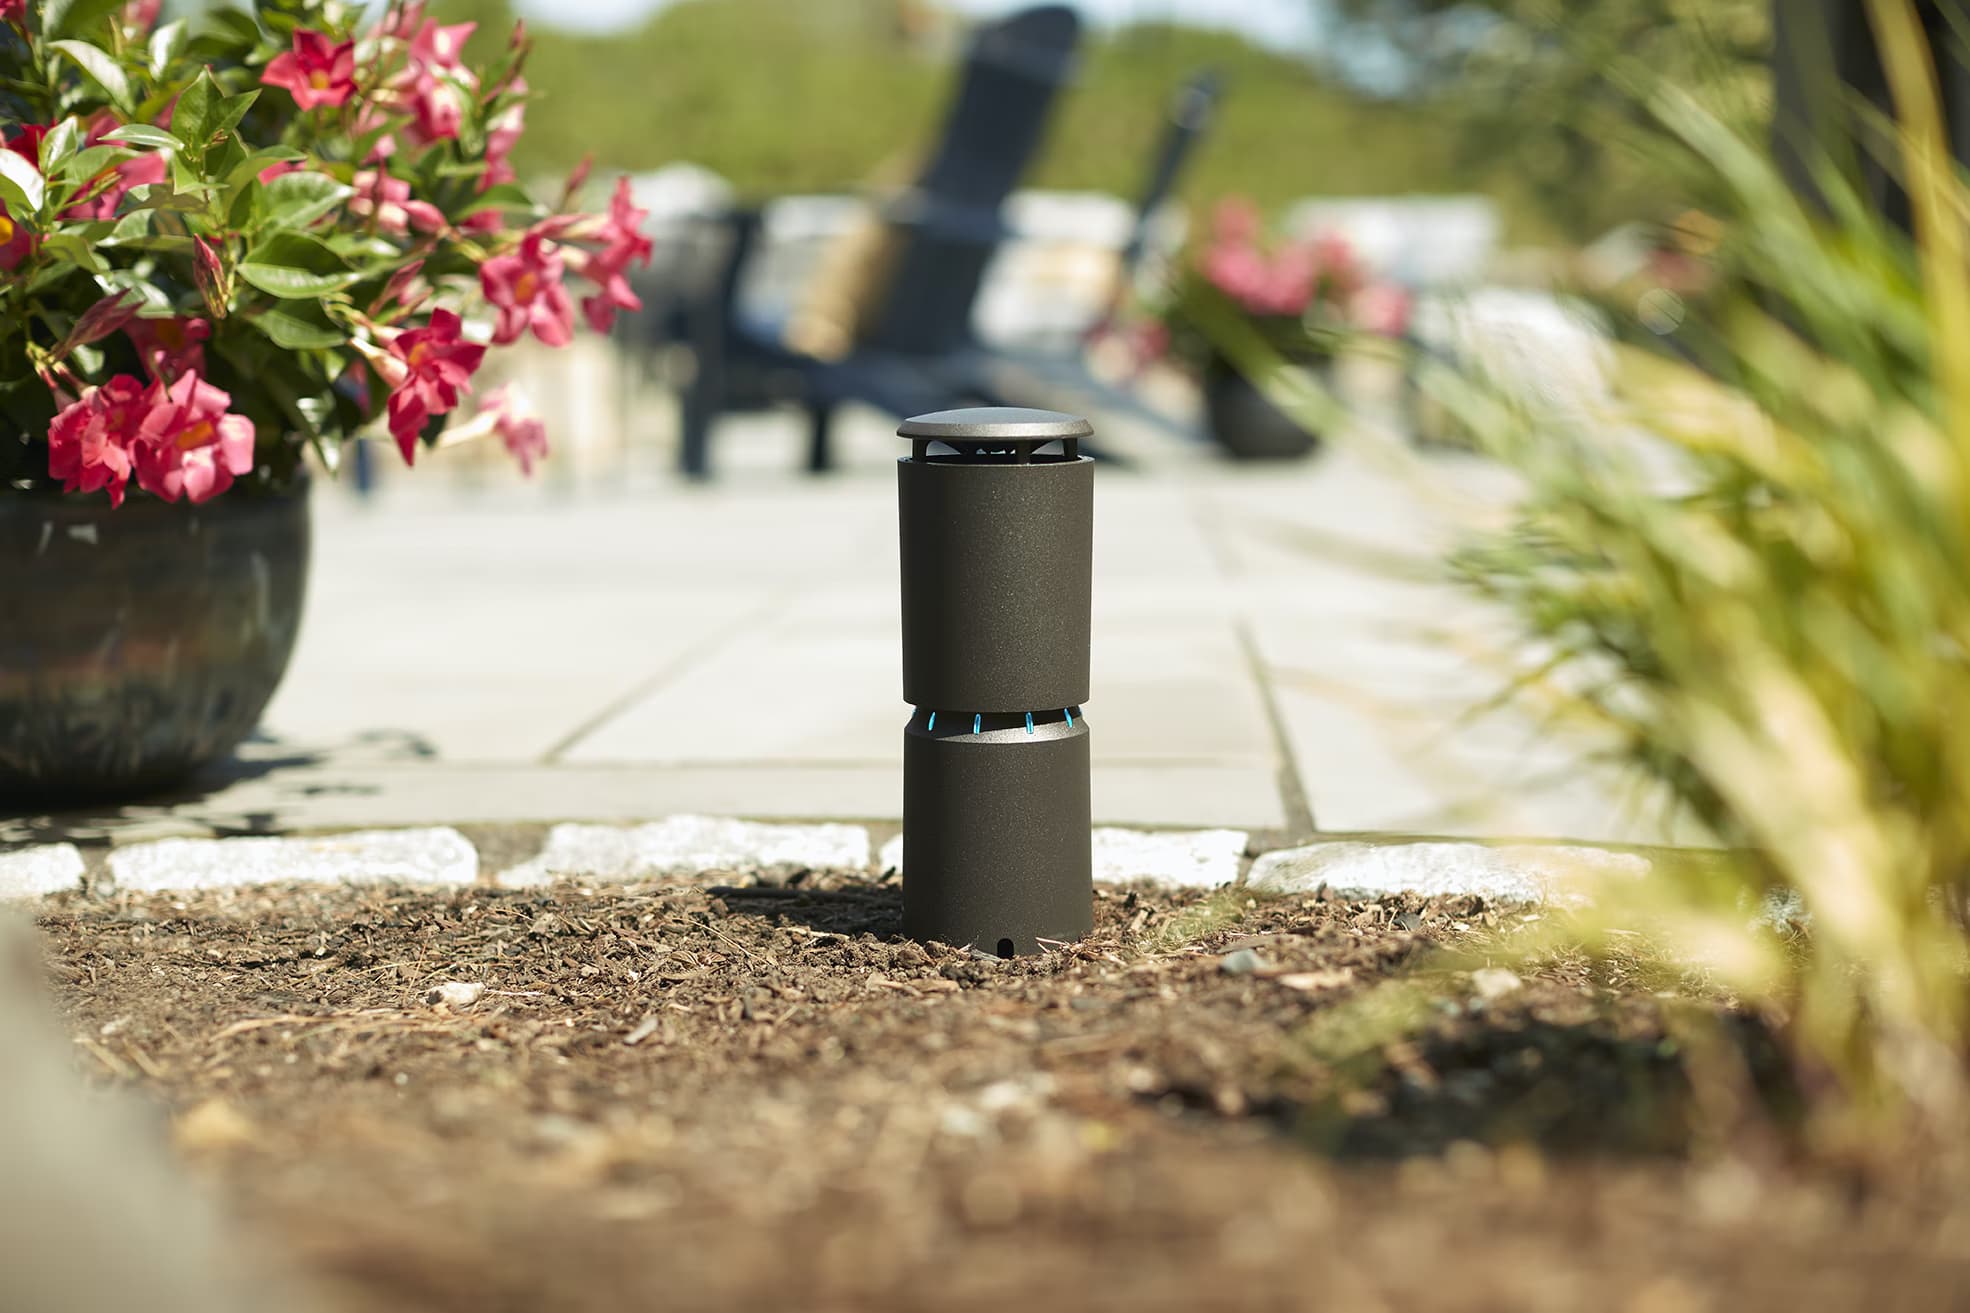 Thermacell launches the first smart mosquito repellent system